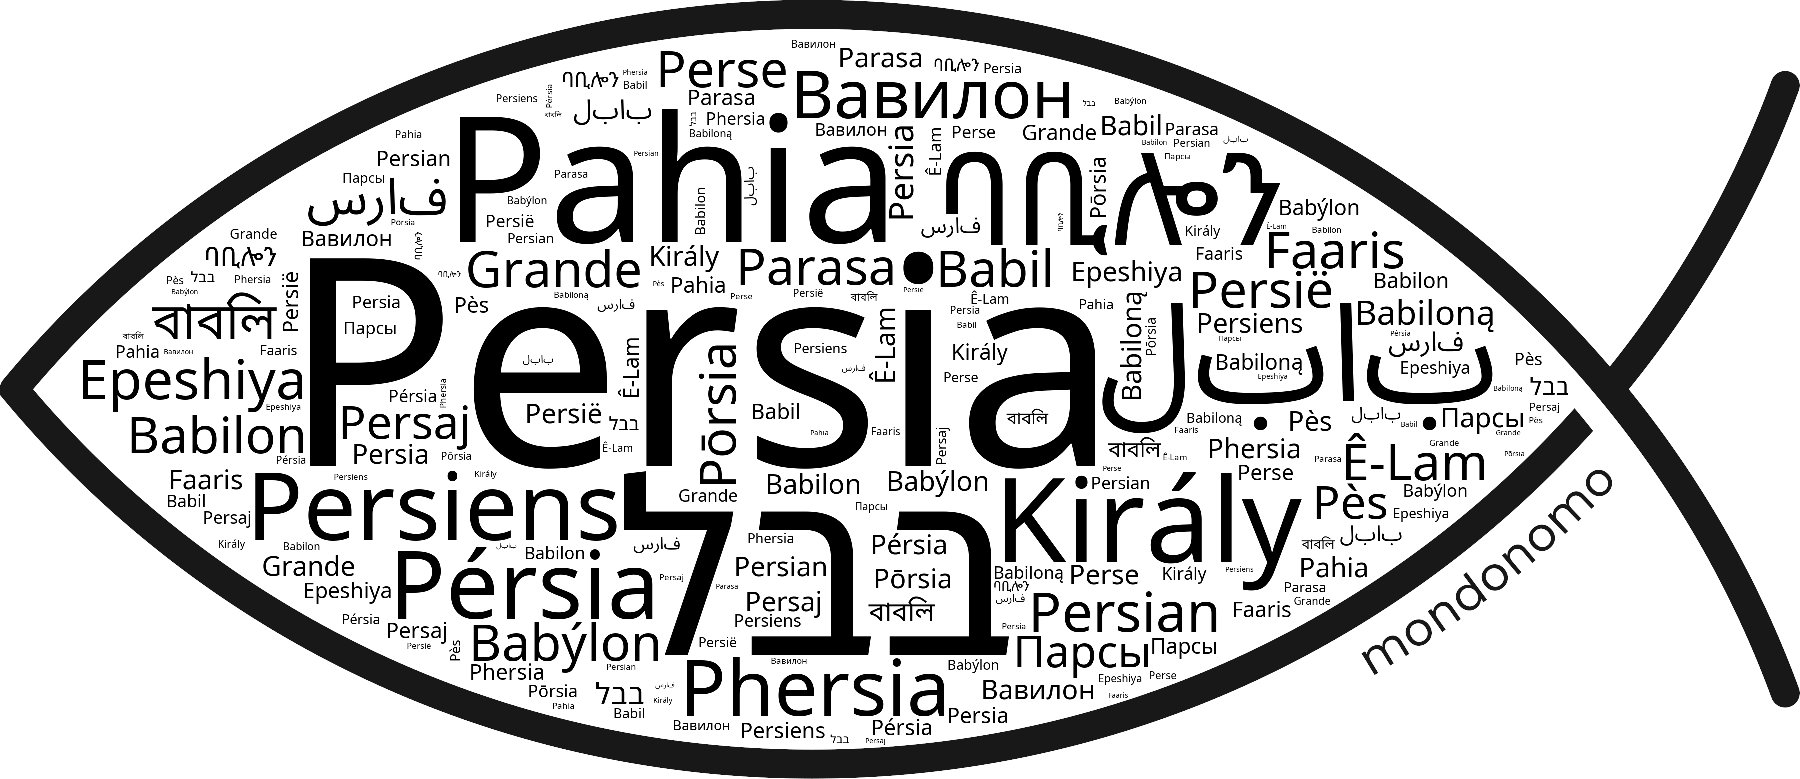 Name Persia in the world's Bibles